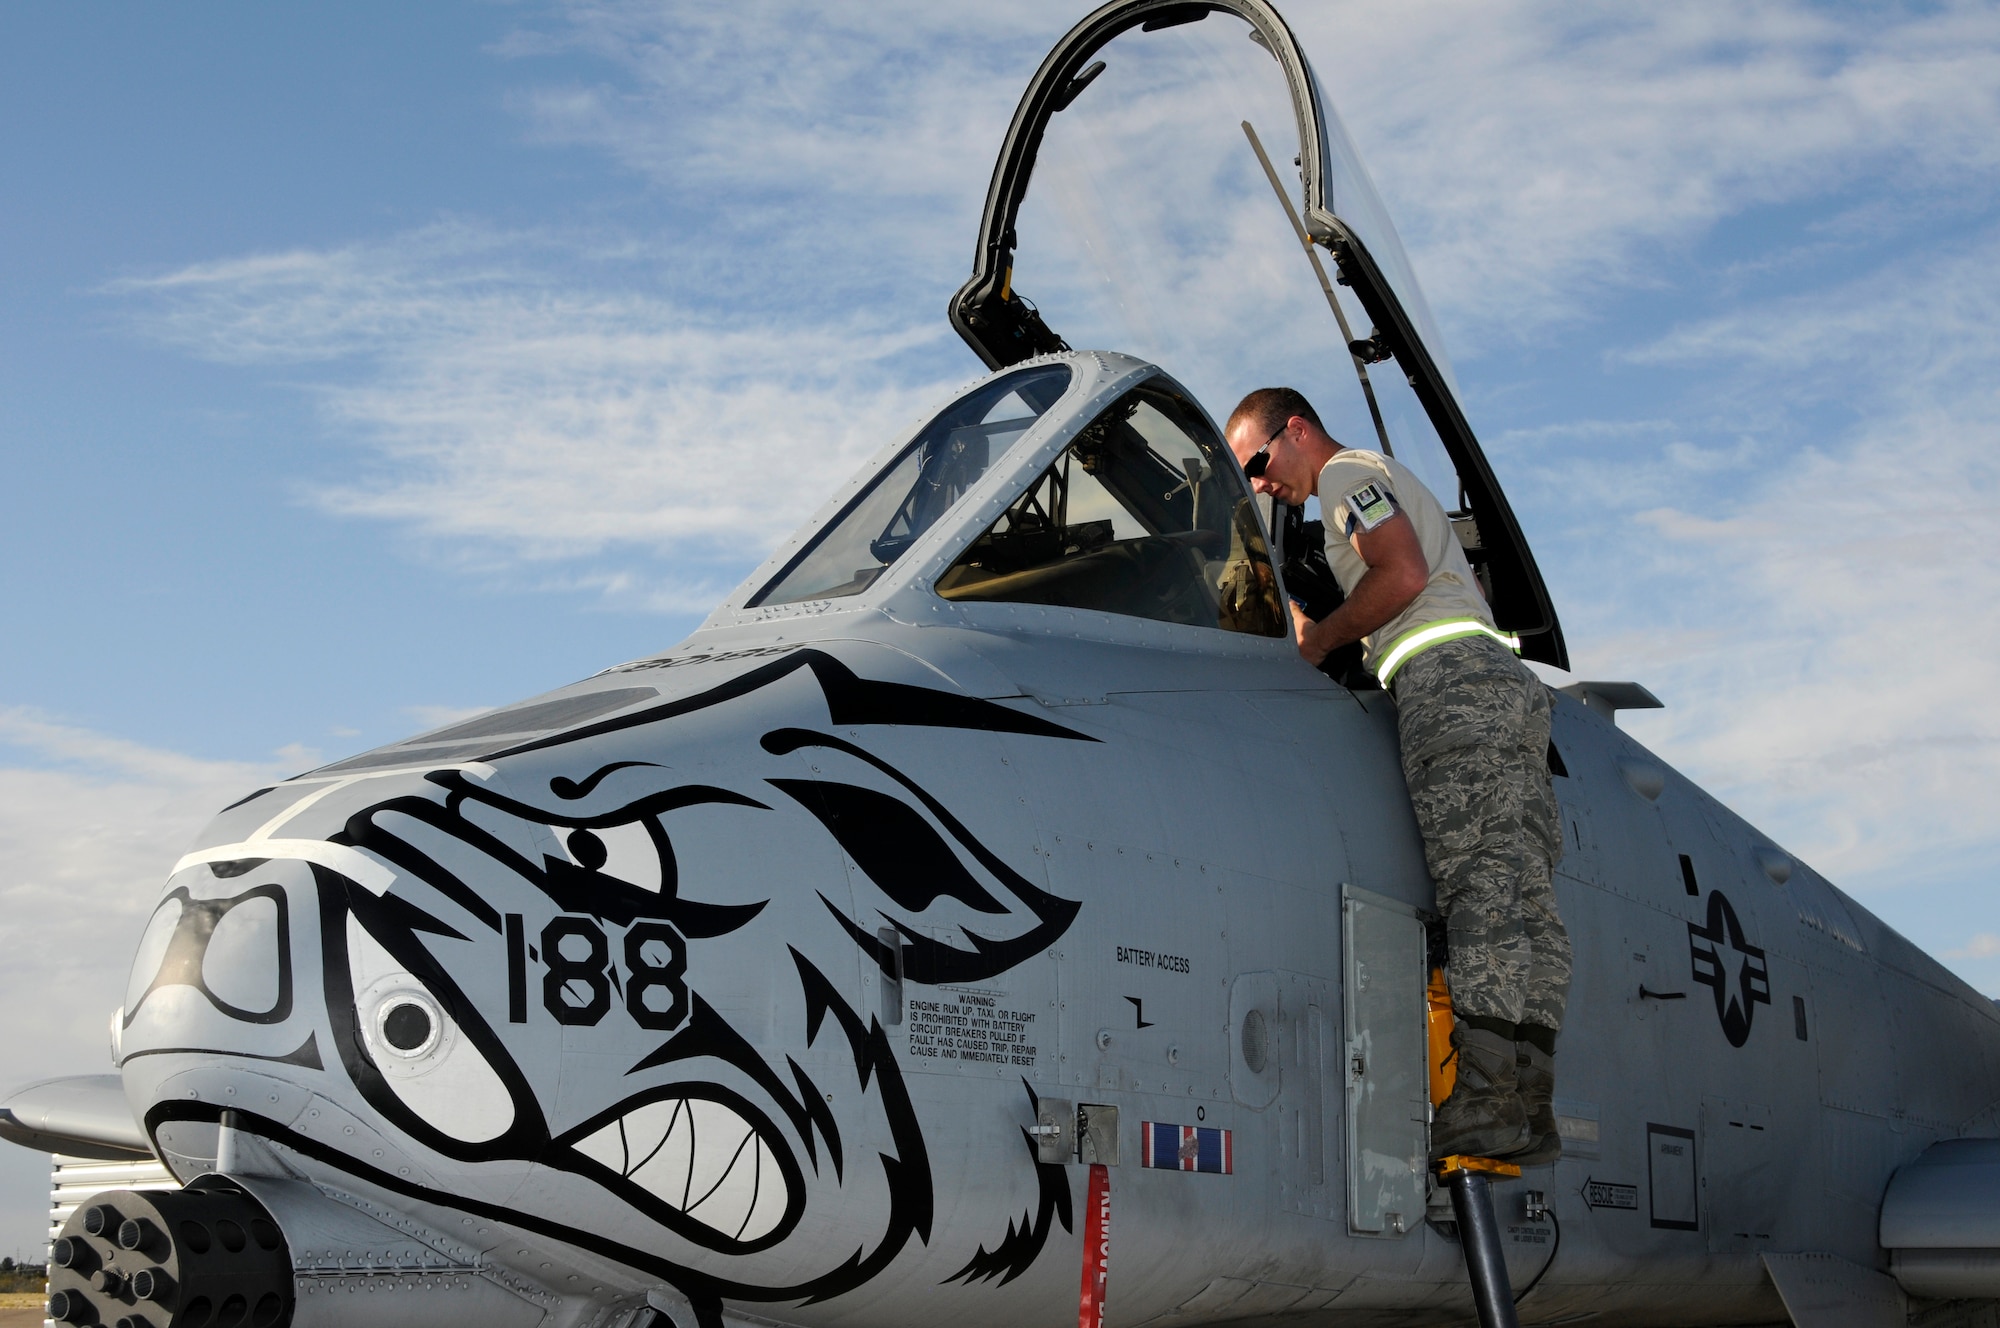 A crew chief with the 188th Fighter Wing preps the cockpit of an A-10C Thunderbolt II “Warthog” for flight at Davis-Monthan Air Force Base, Ariz., Feb. 16. The 188th deployed approximately 300 Airmen to Davis-Monthan AFB to participate in Operation Snowbird in preparation for the Flying Razorbacks’ deployment to Afghanistan this summer. (National Guard photo by Senior Master Sgt. Dennis Brambl/188th Fighter Wing Public Affairs)

